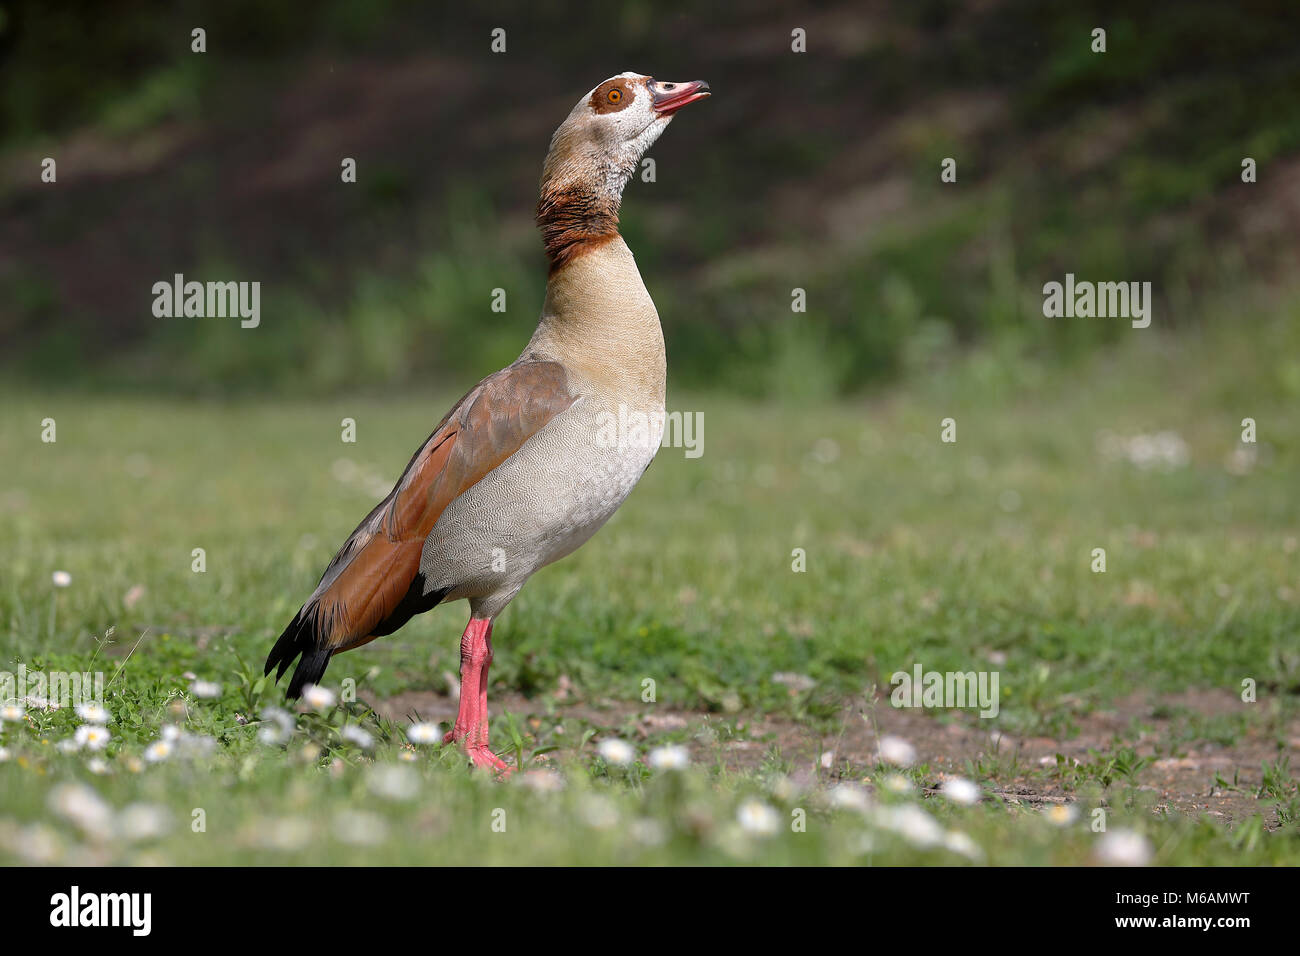 Egyptian goose (Alopochen aegyptiacus) stands in the grass with daisies, Rhineland-Palatinate, Germany Stock Photo